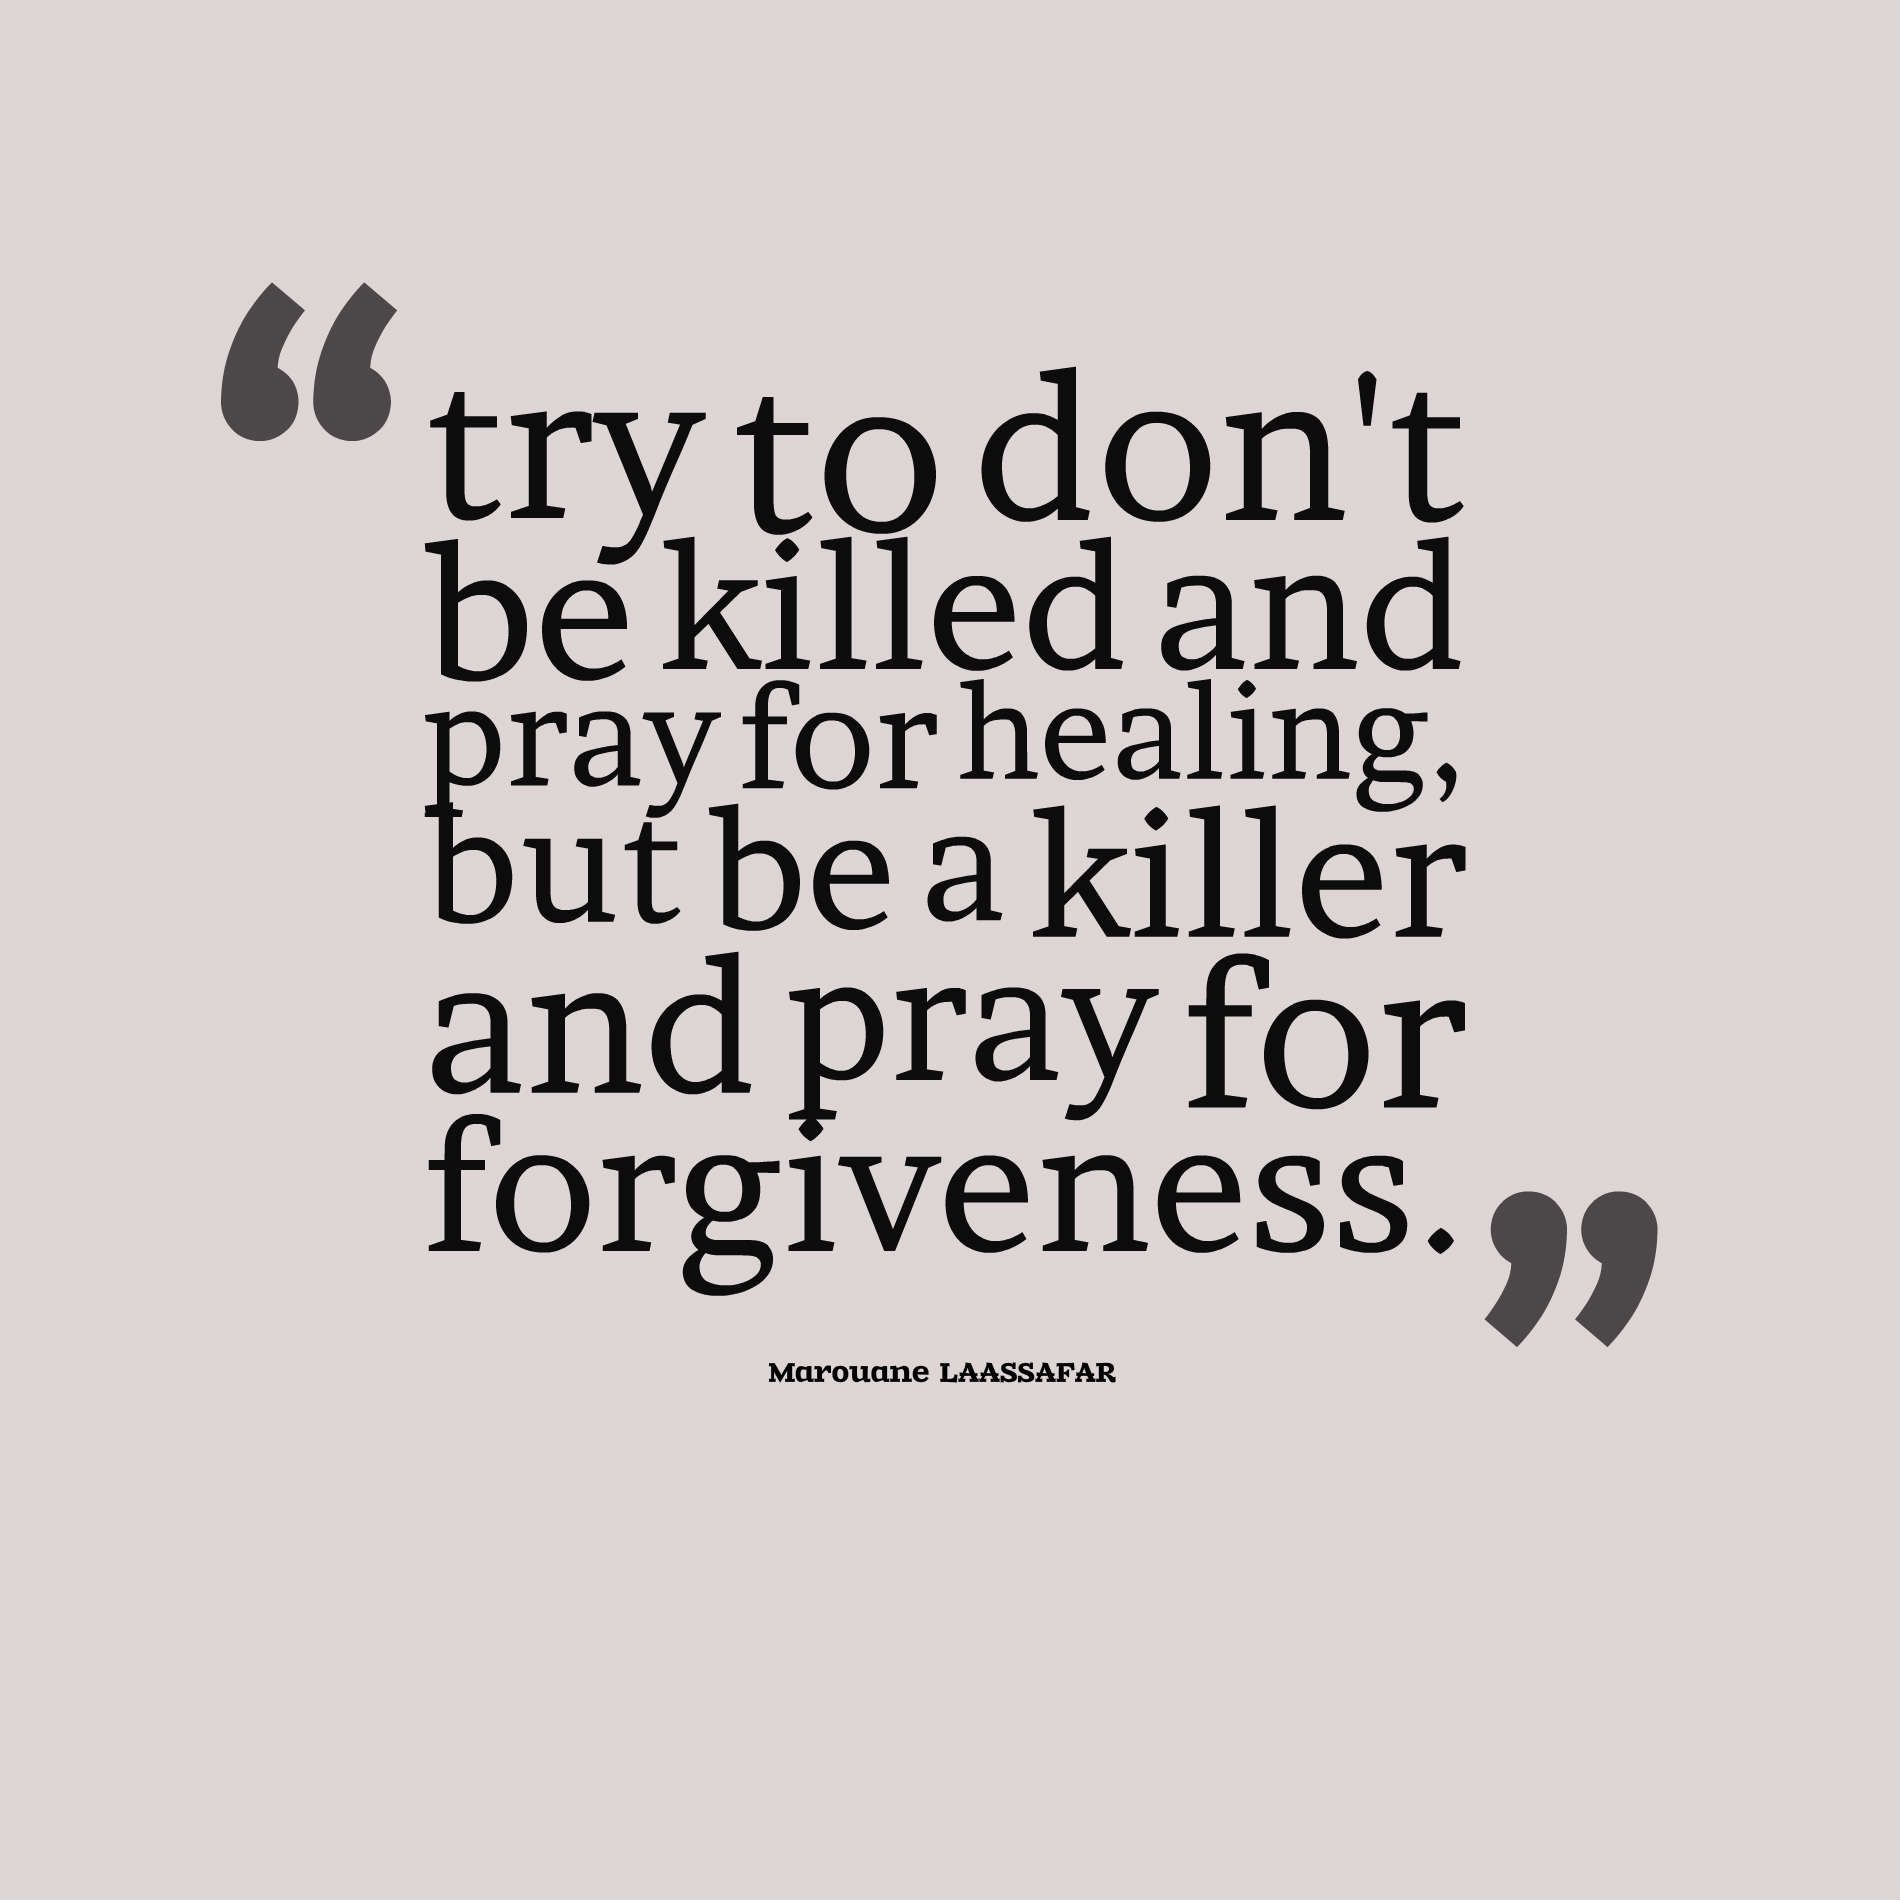 try to don't be killed and pray for healing, but be a killer and pray for forgiveness.